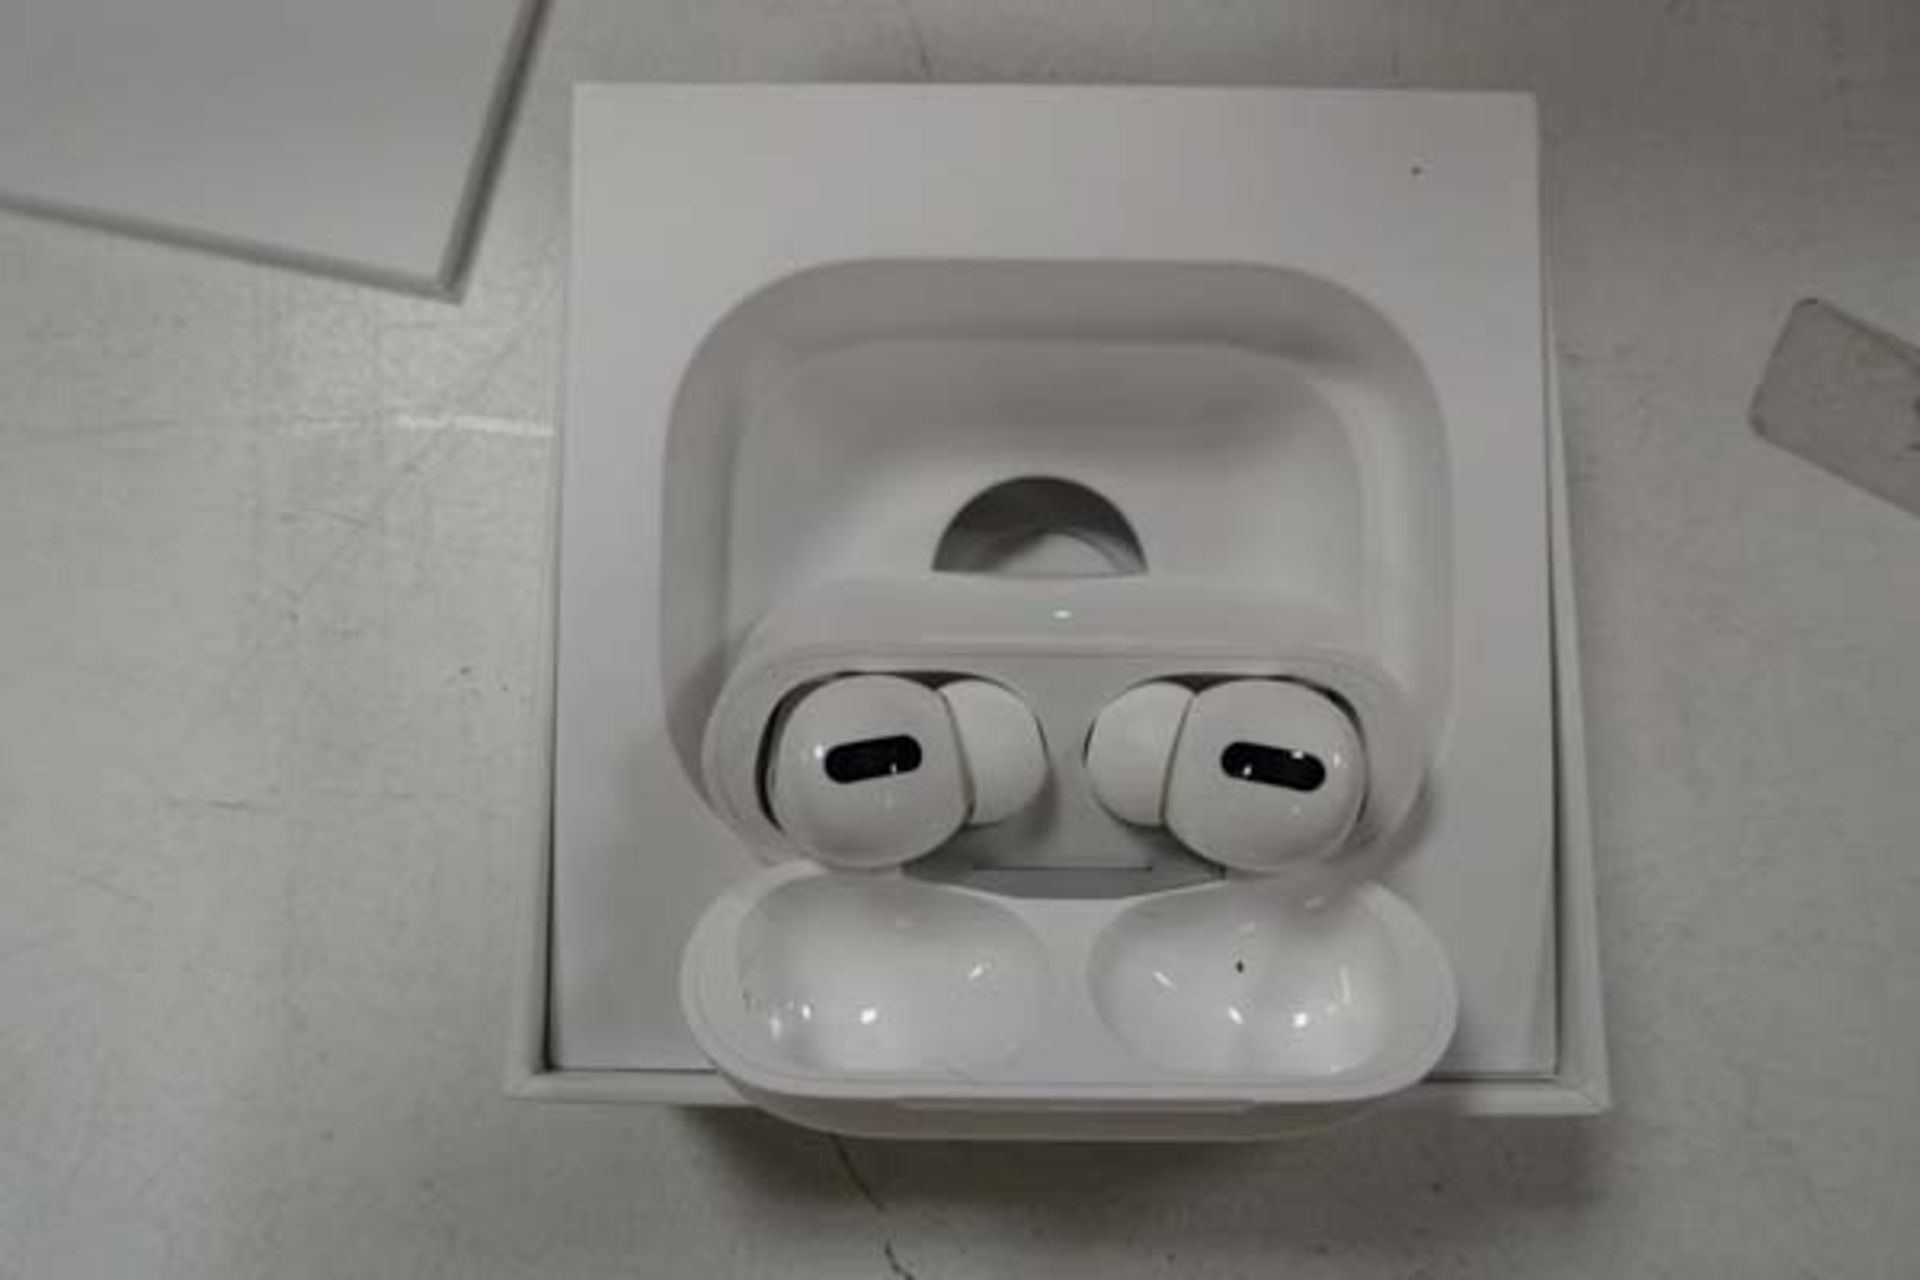 Pair of Apple AirPods Pro with wireless charging case and box